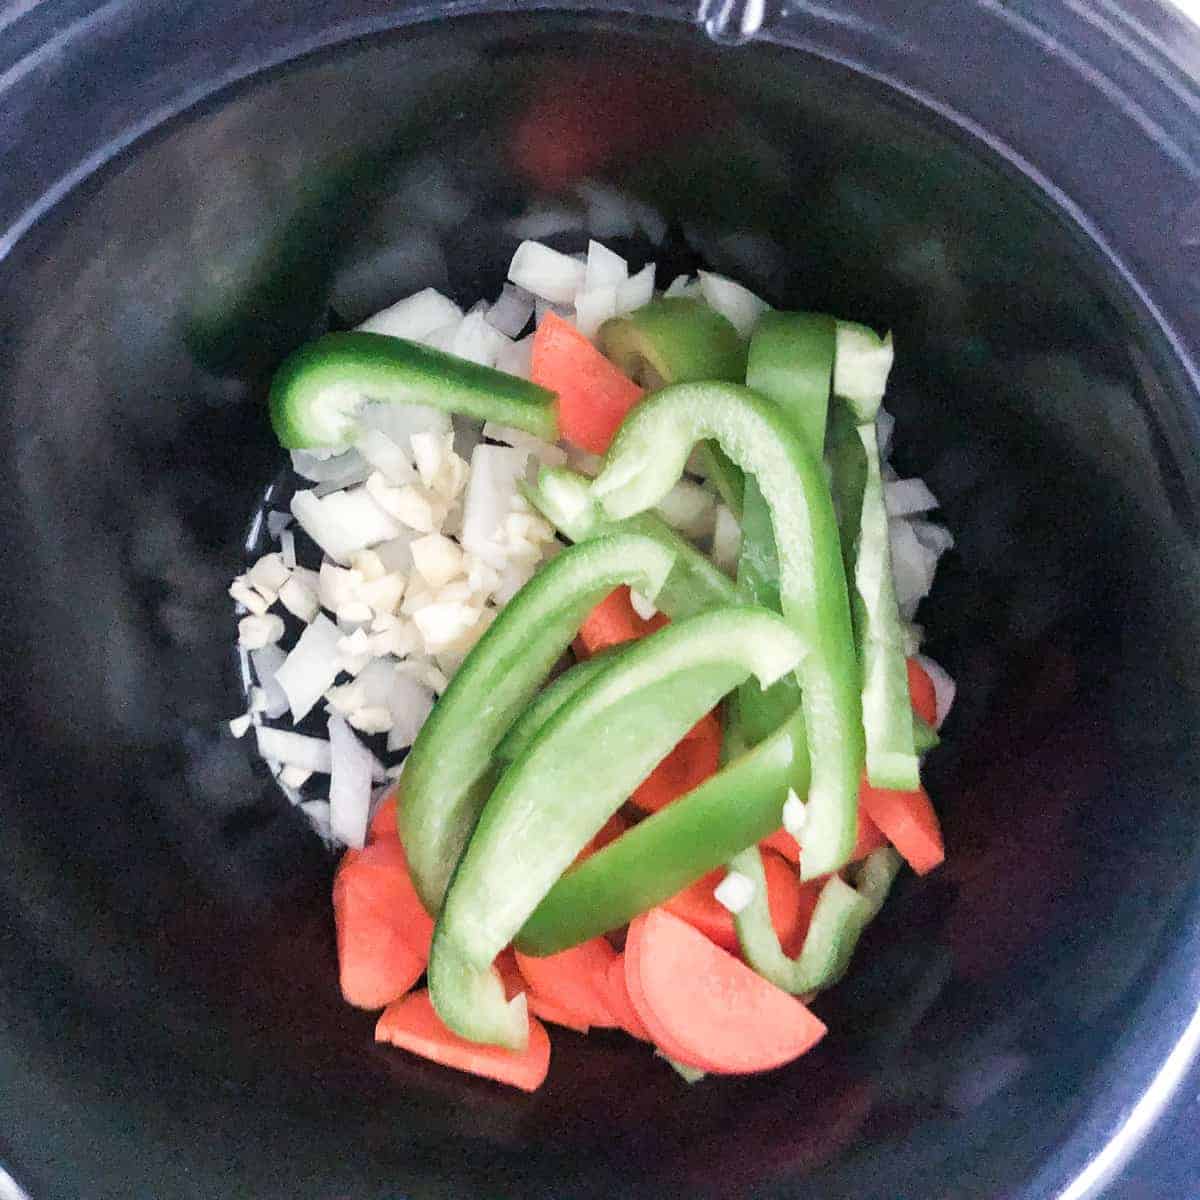 sliced onions, carrots, green pepper, and garlic in 3 quart slow cooker.